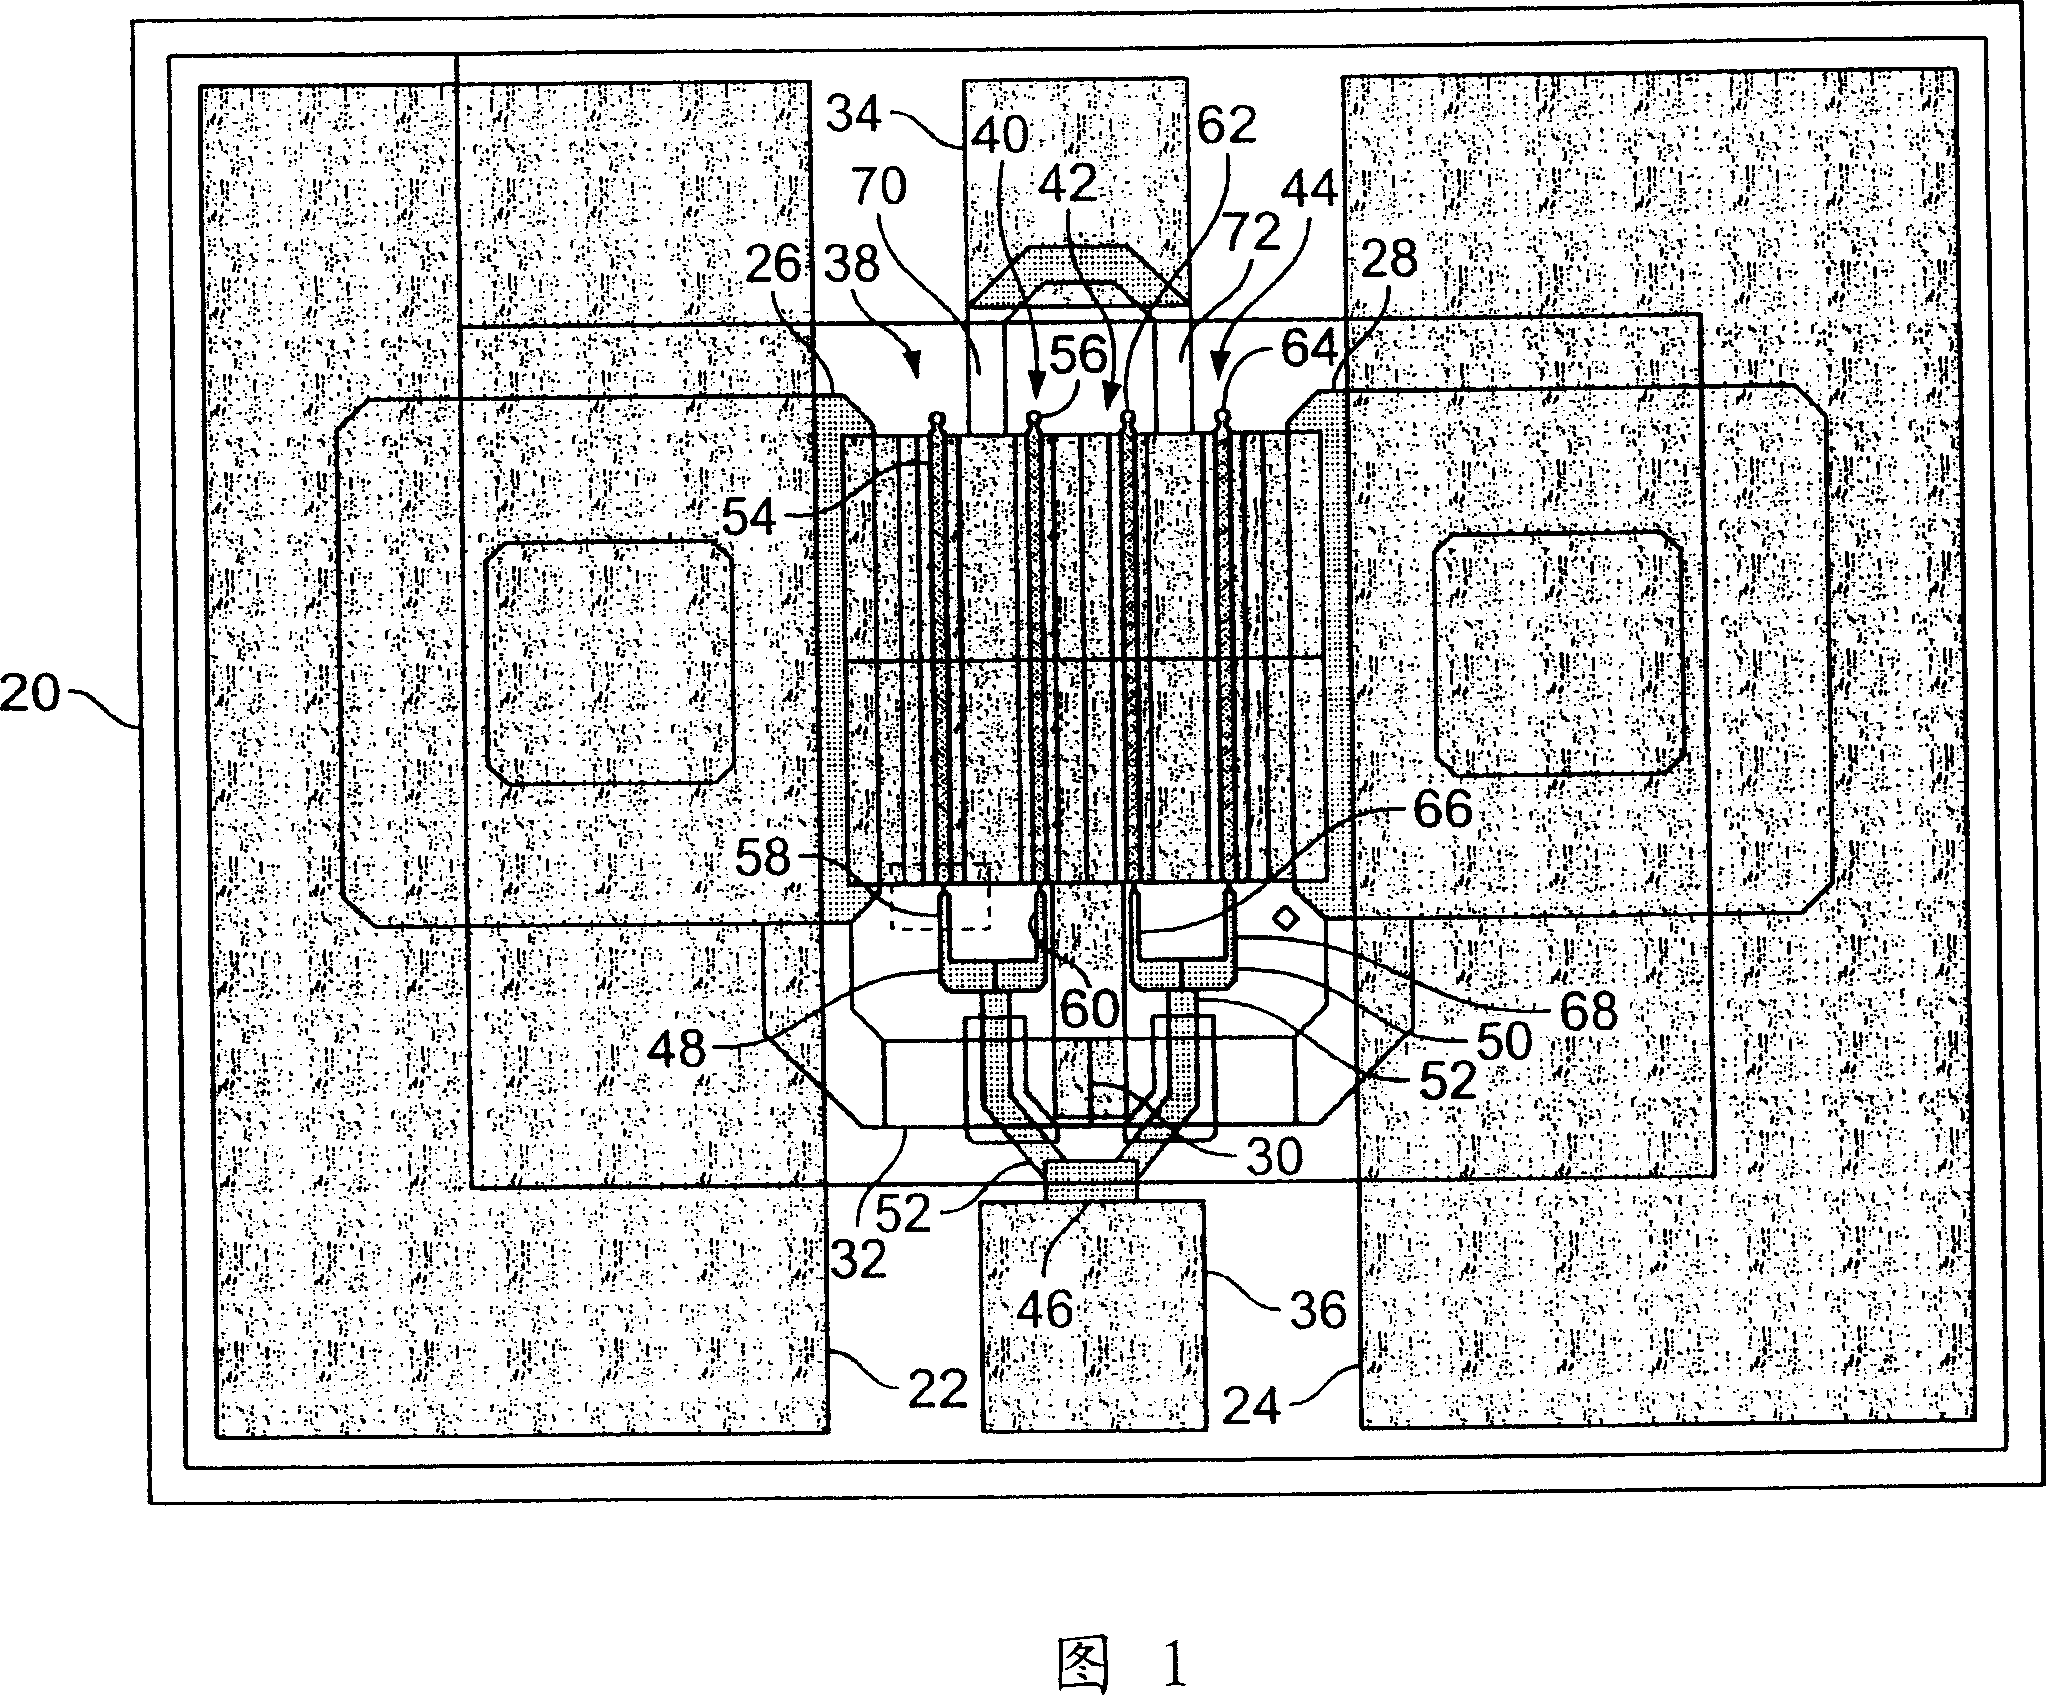 Dual field plate mesfet and its forming method